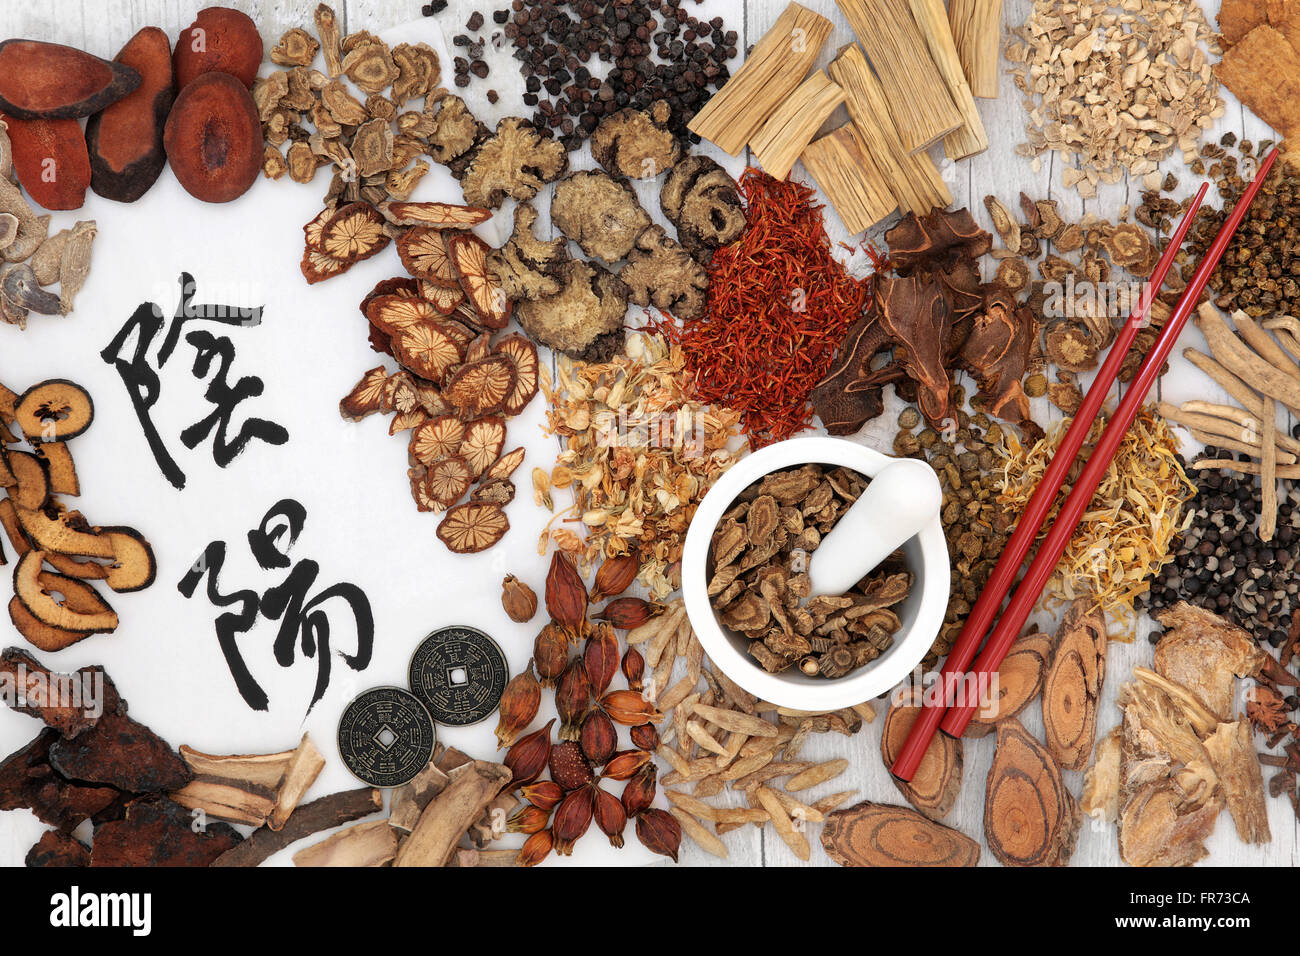 Yin and yang symbols with traditional chinese herbal medicine selection, i ching coins, mortar with pestle and chopsticks. Stock Photo